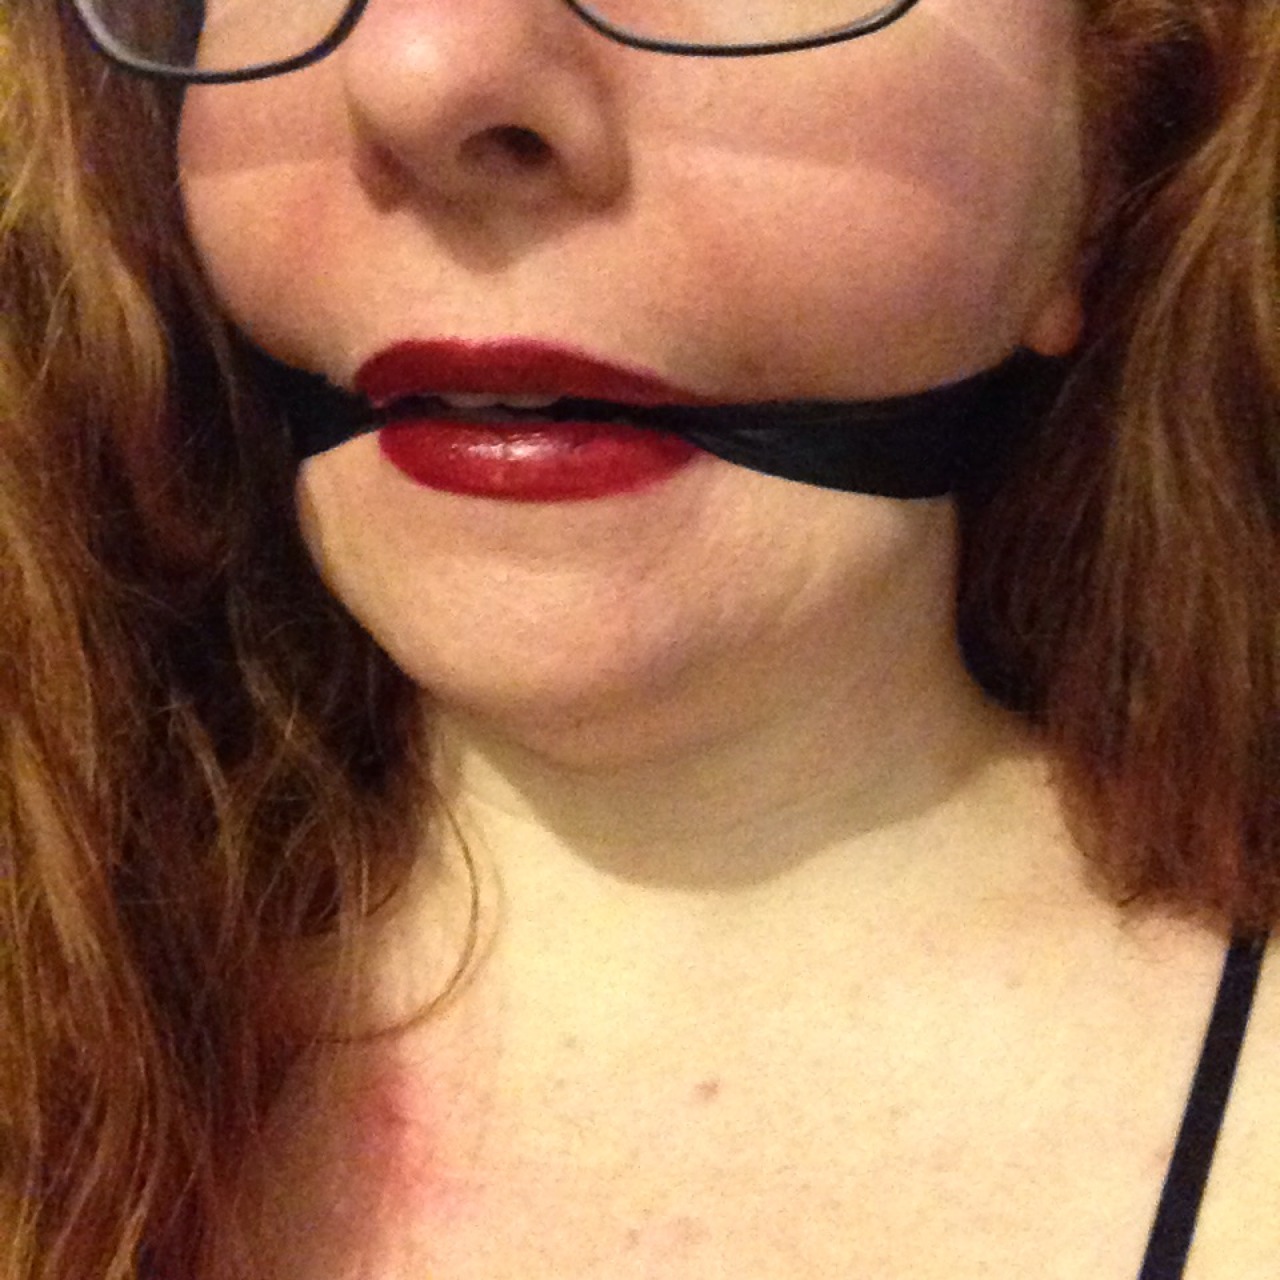 manic-pixie-ginger-slut:  A photo set of me donning the most restrictive tape gag